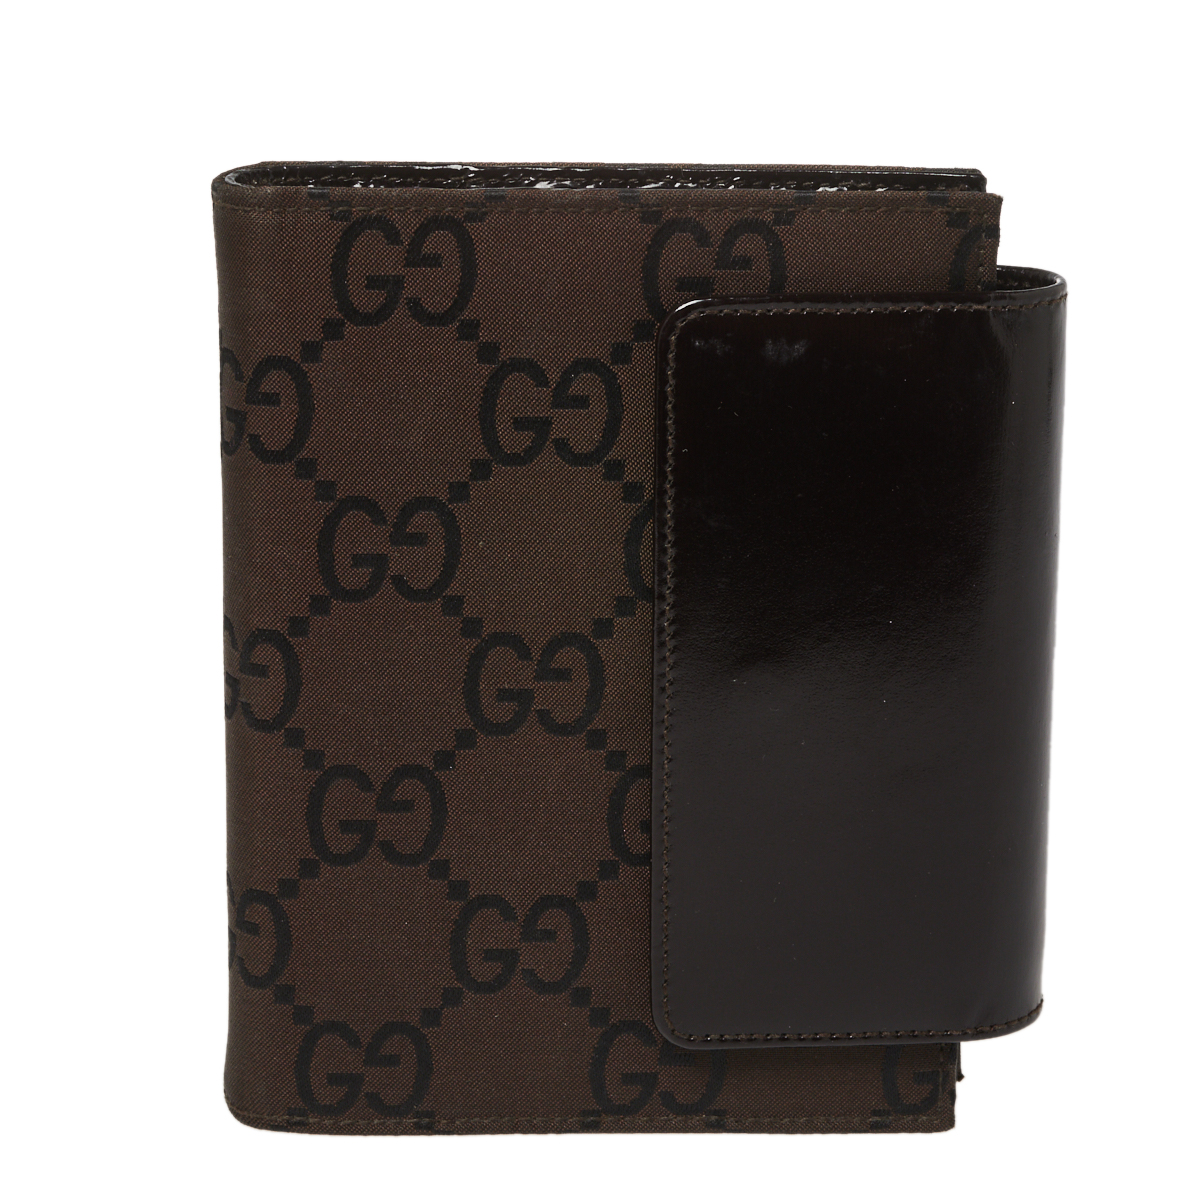 Pre-owned Gucci Brown Gg Nylon And Leather Agenda Planner